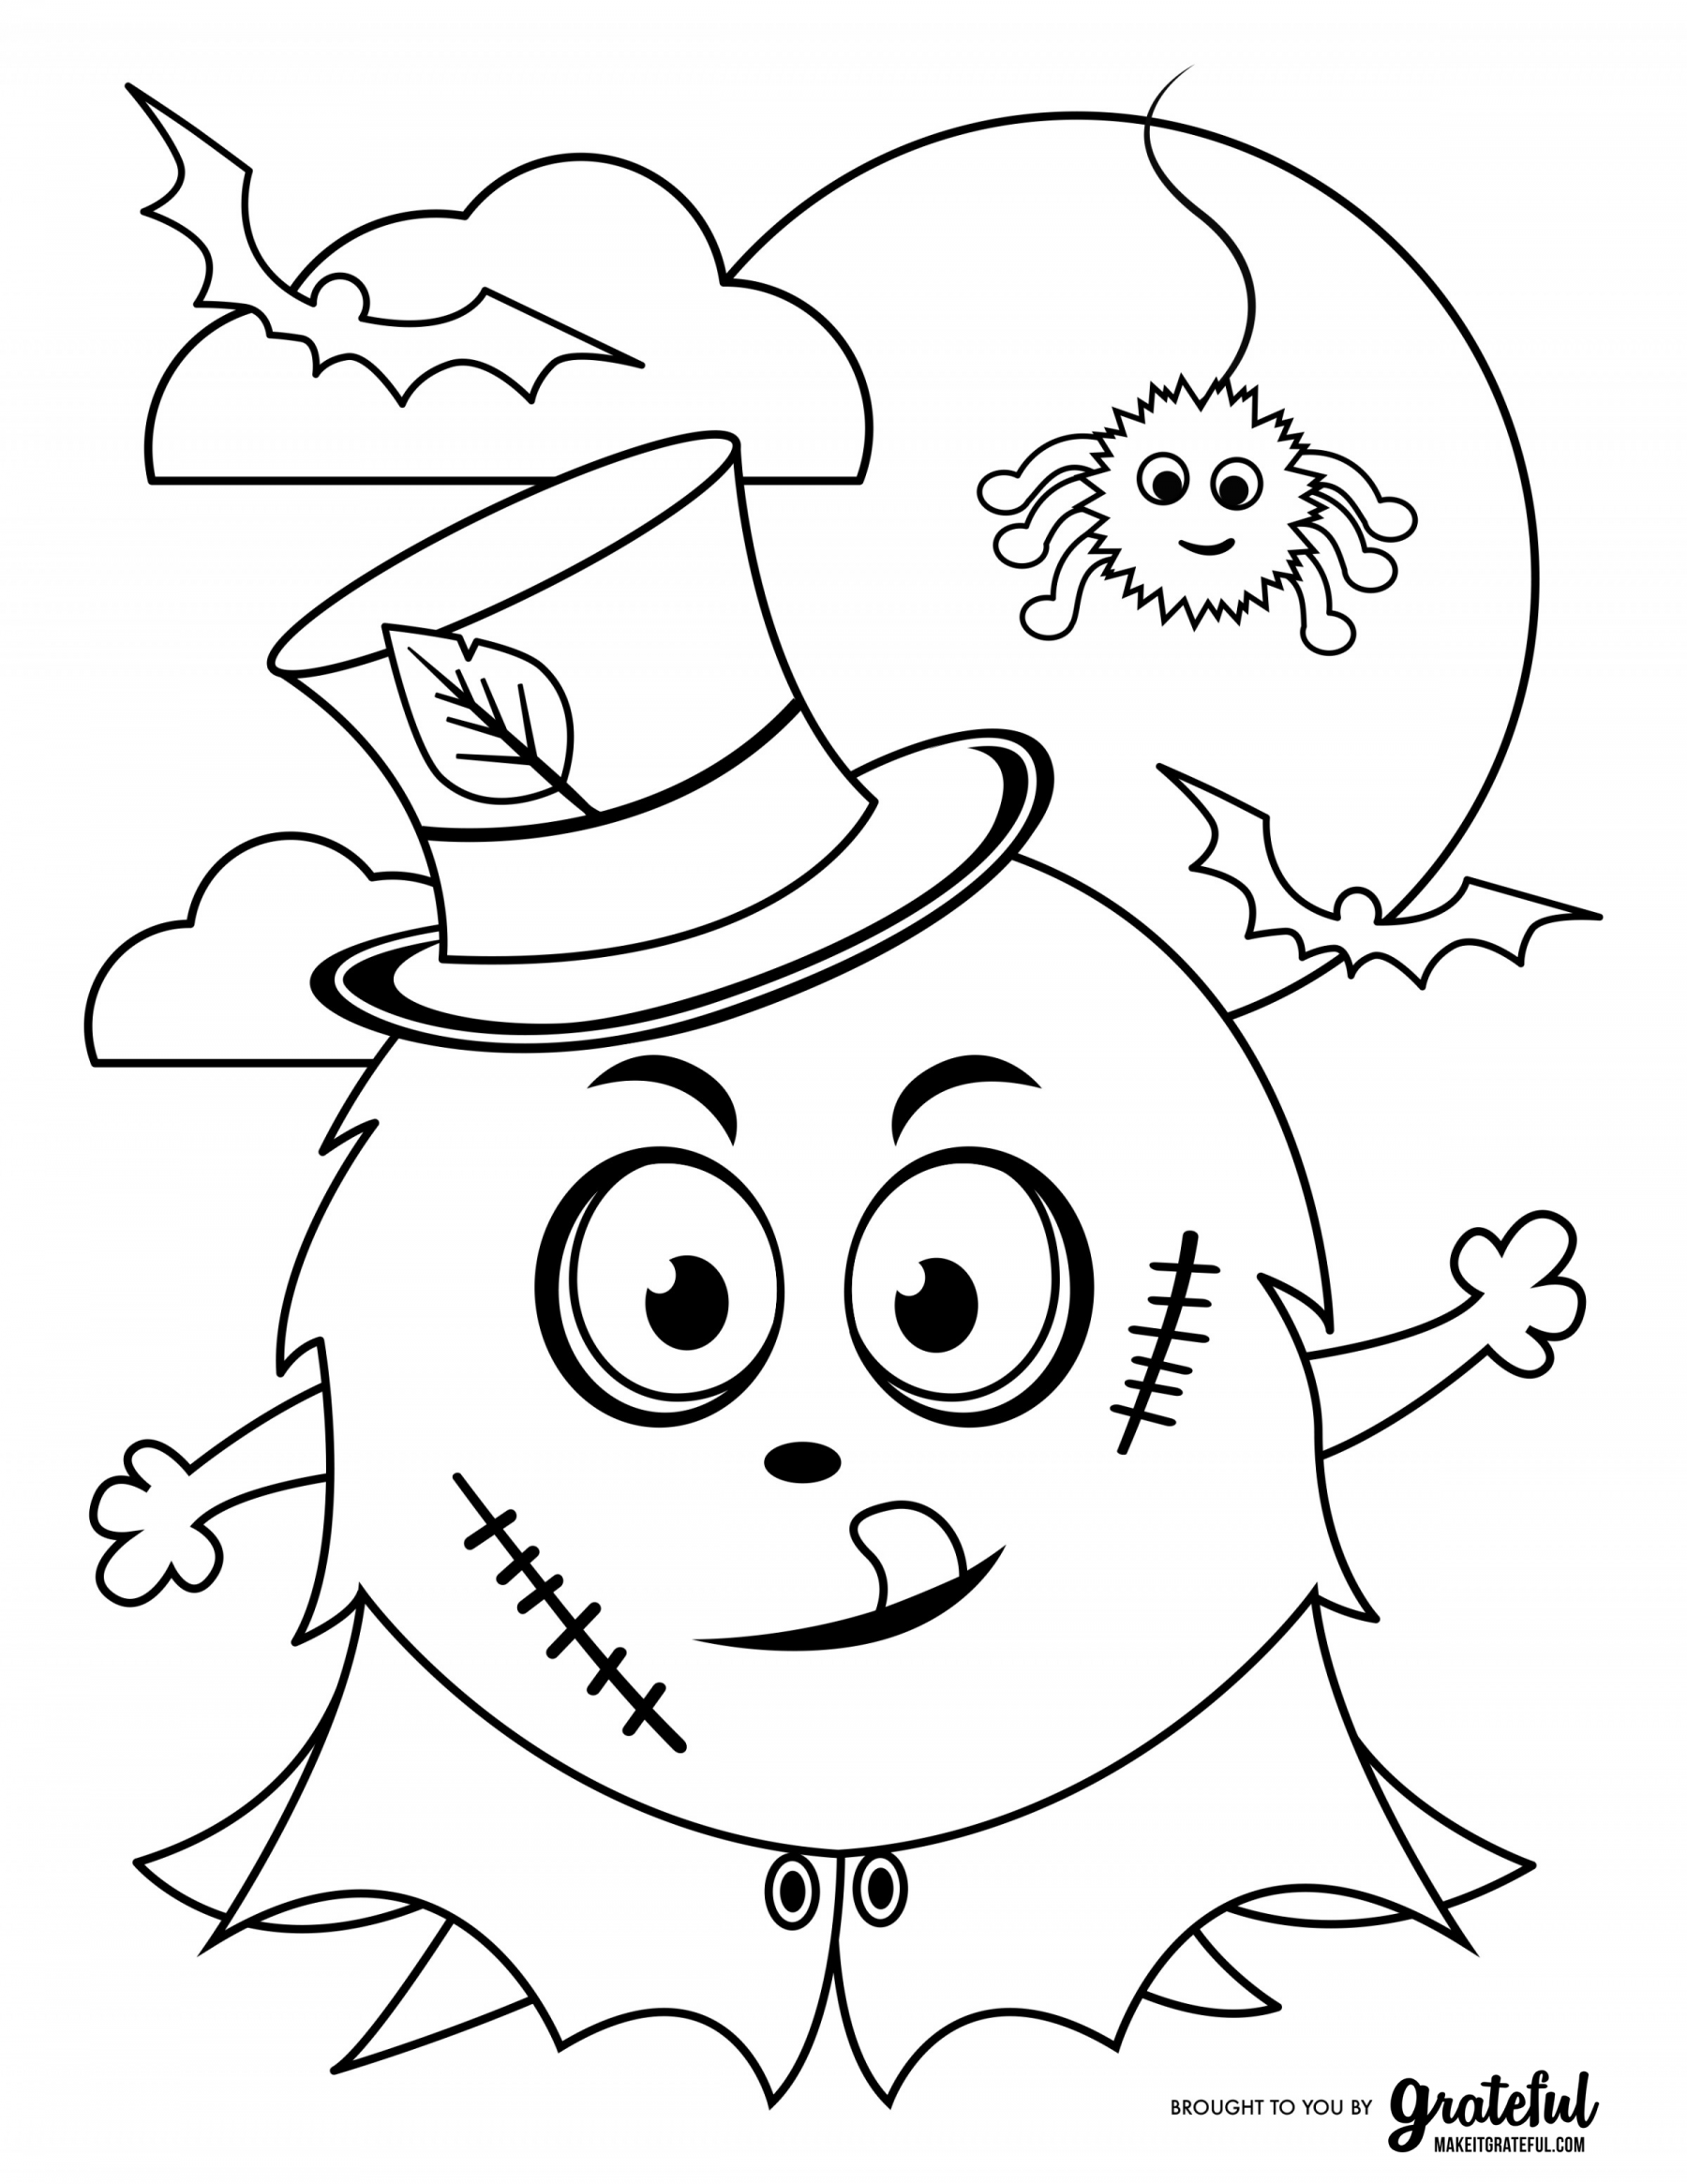 Free Halloween Coloring Pages For Kids or For The Kid In You 